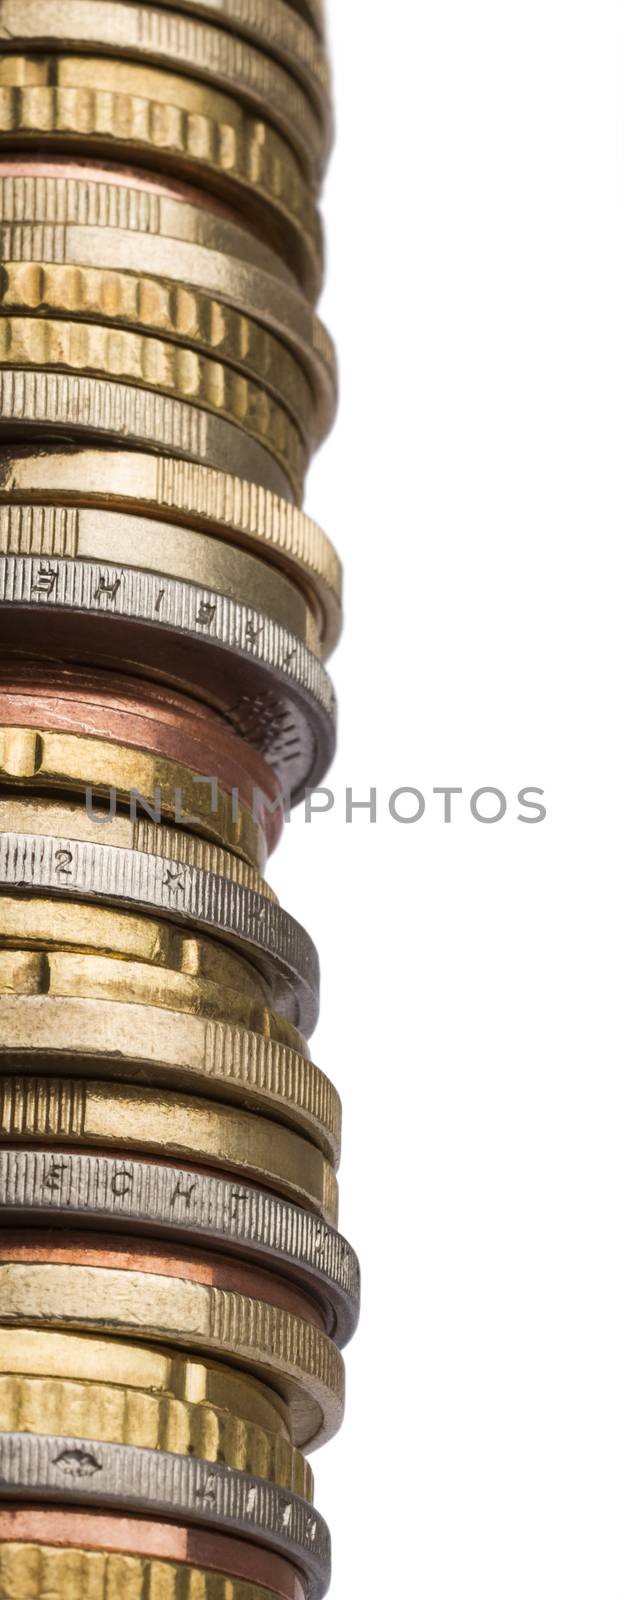 tower of different euro coins in close up shot by gewoldi